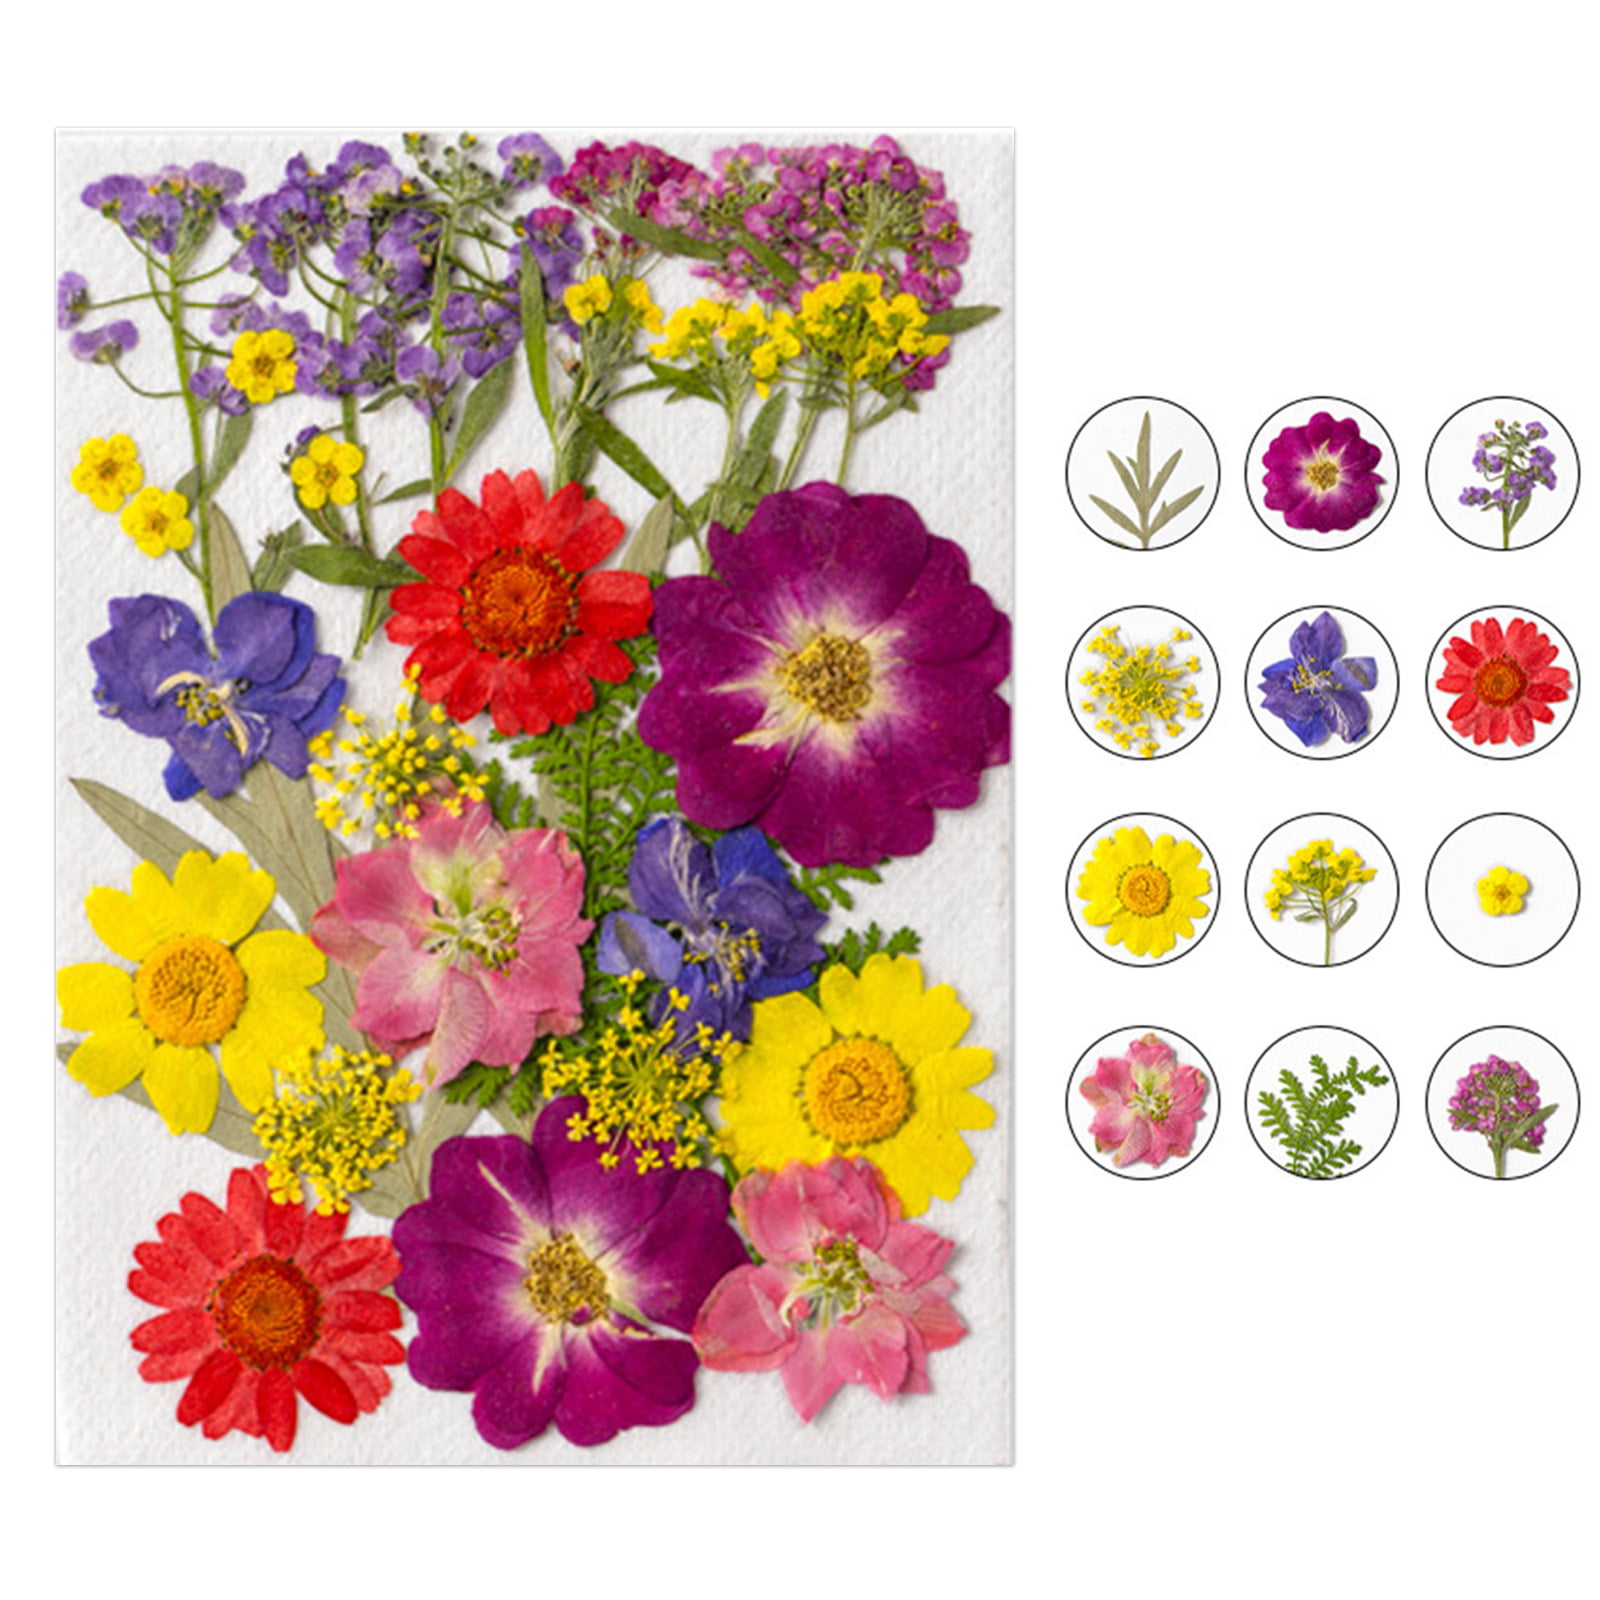 RUSR Dried Flower Material Package Real Pressed Dry Flowers